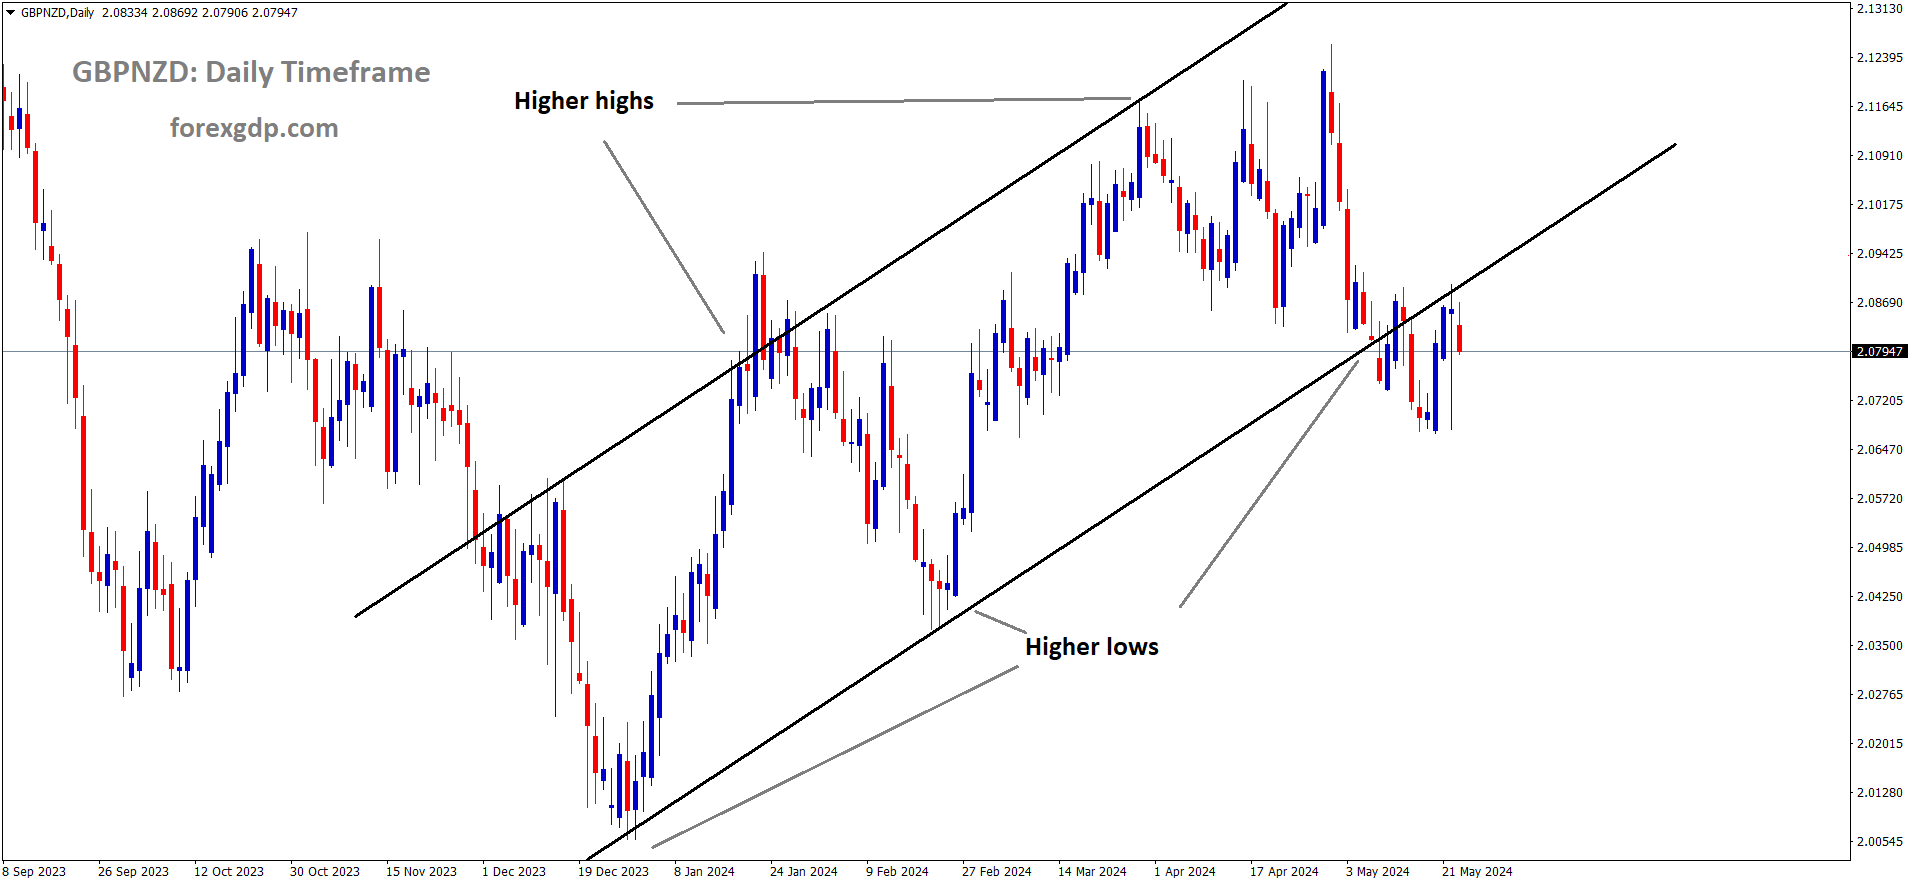 GBPNZD is moving in Ascending channel and market has reached higher low area of the channel